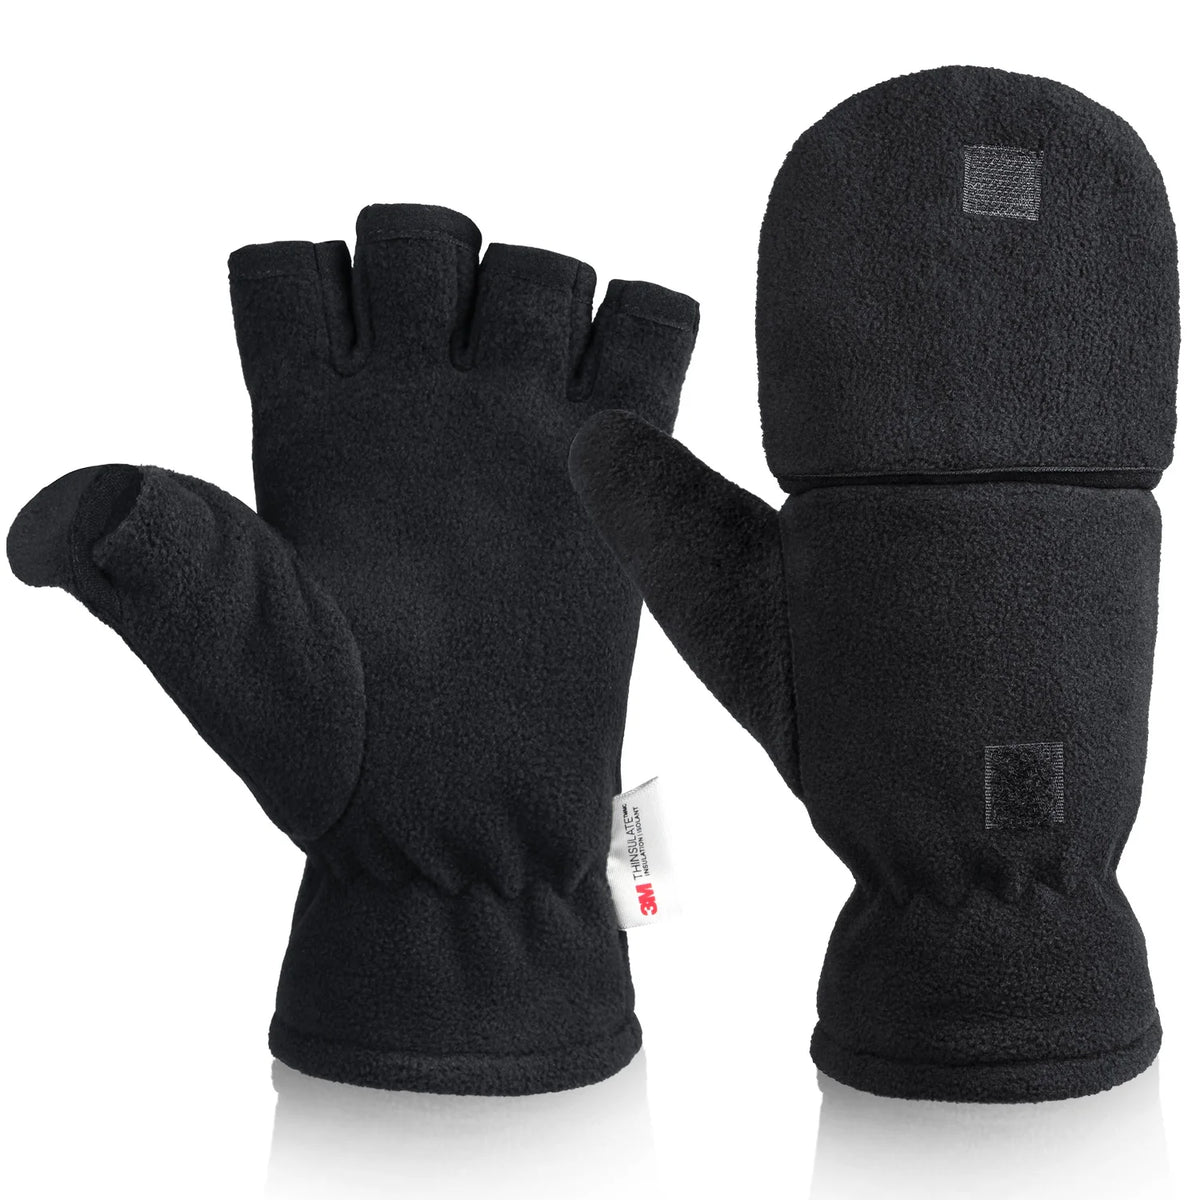 OZERO Winter Warm Gloves Fingerless Thermal Mittens Windproof Insulated Polar Fleece Outdoor Ski Racing Gloves For Men And Women